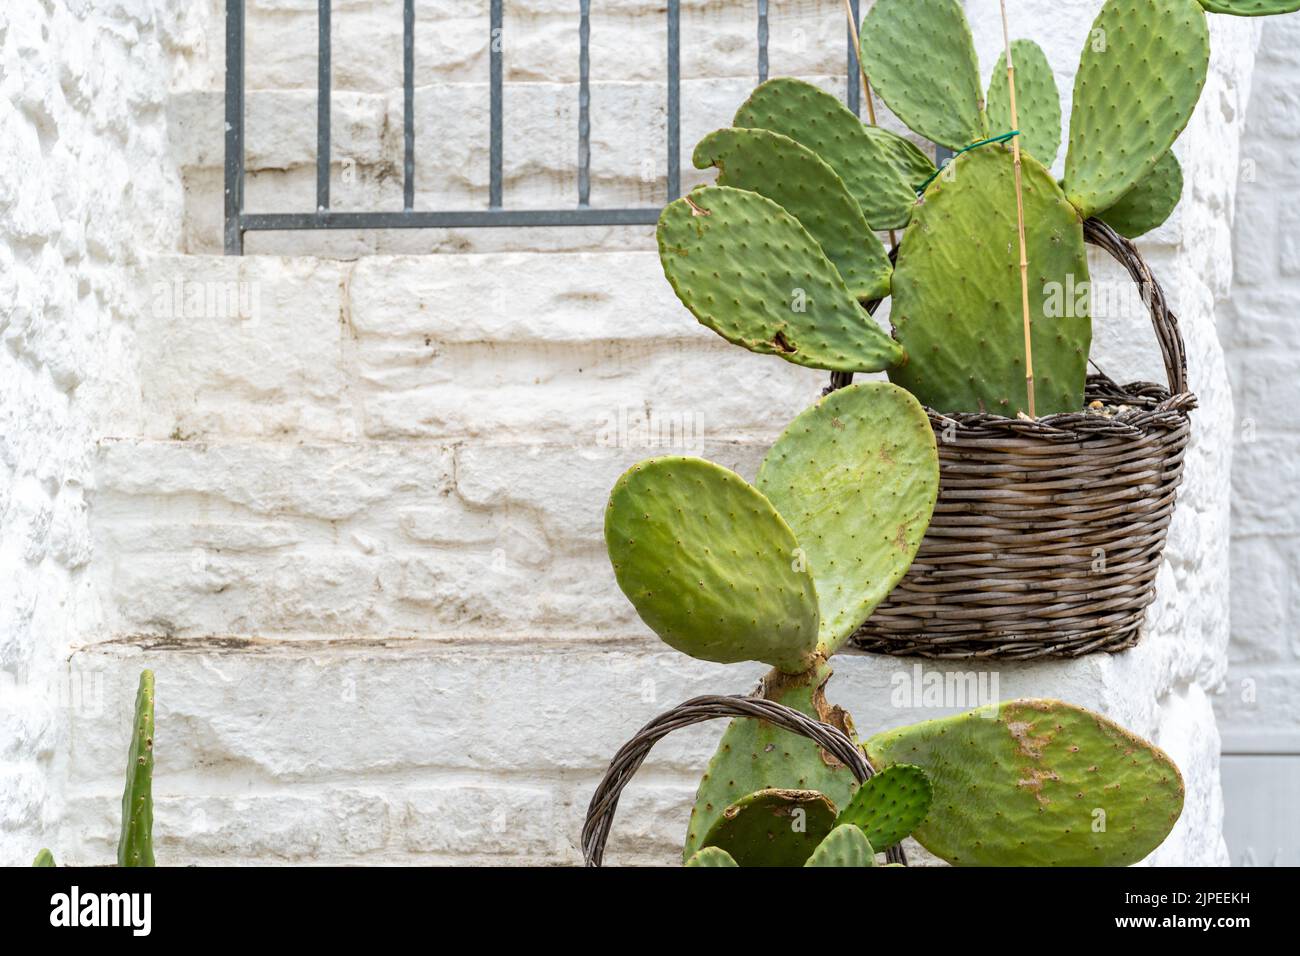 Prickly pear cactus (Opuntia ficus-indica, also known as Indian fig opuntia, barbary fig, cactus pear, spineless cactus) in Alberobello Puglia Stock Photo